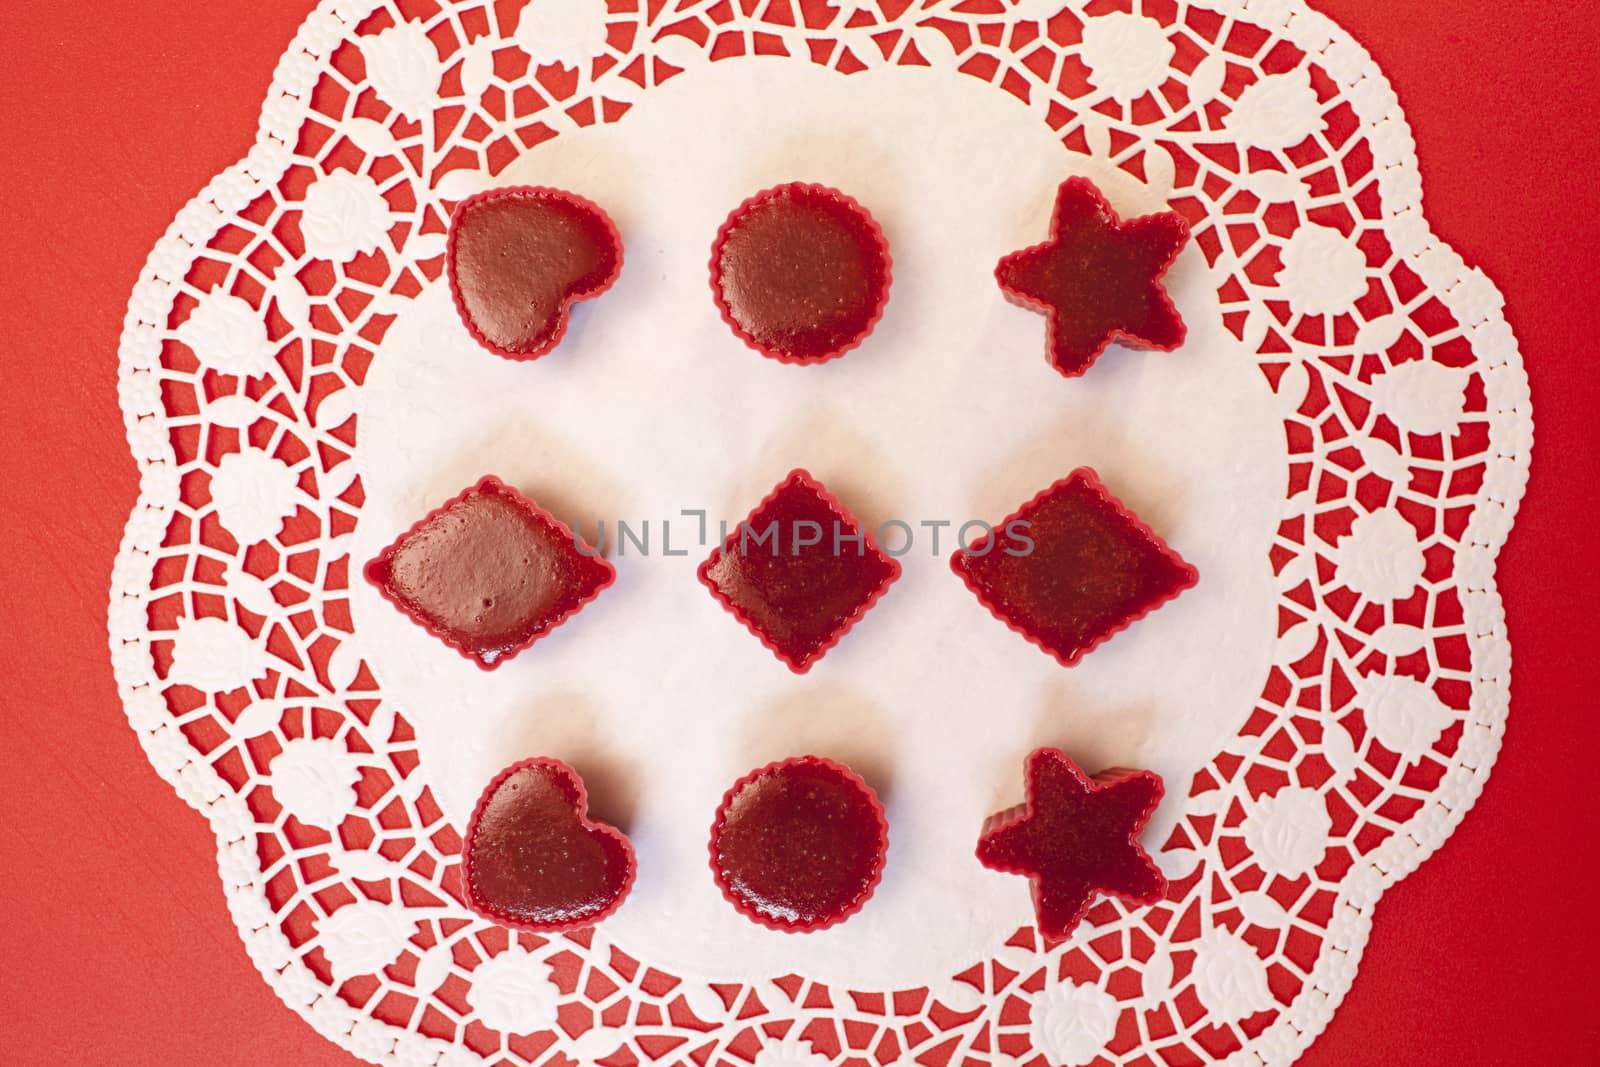 handmade Red marmalade in molds white napkin, overhead view